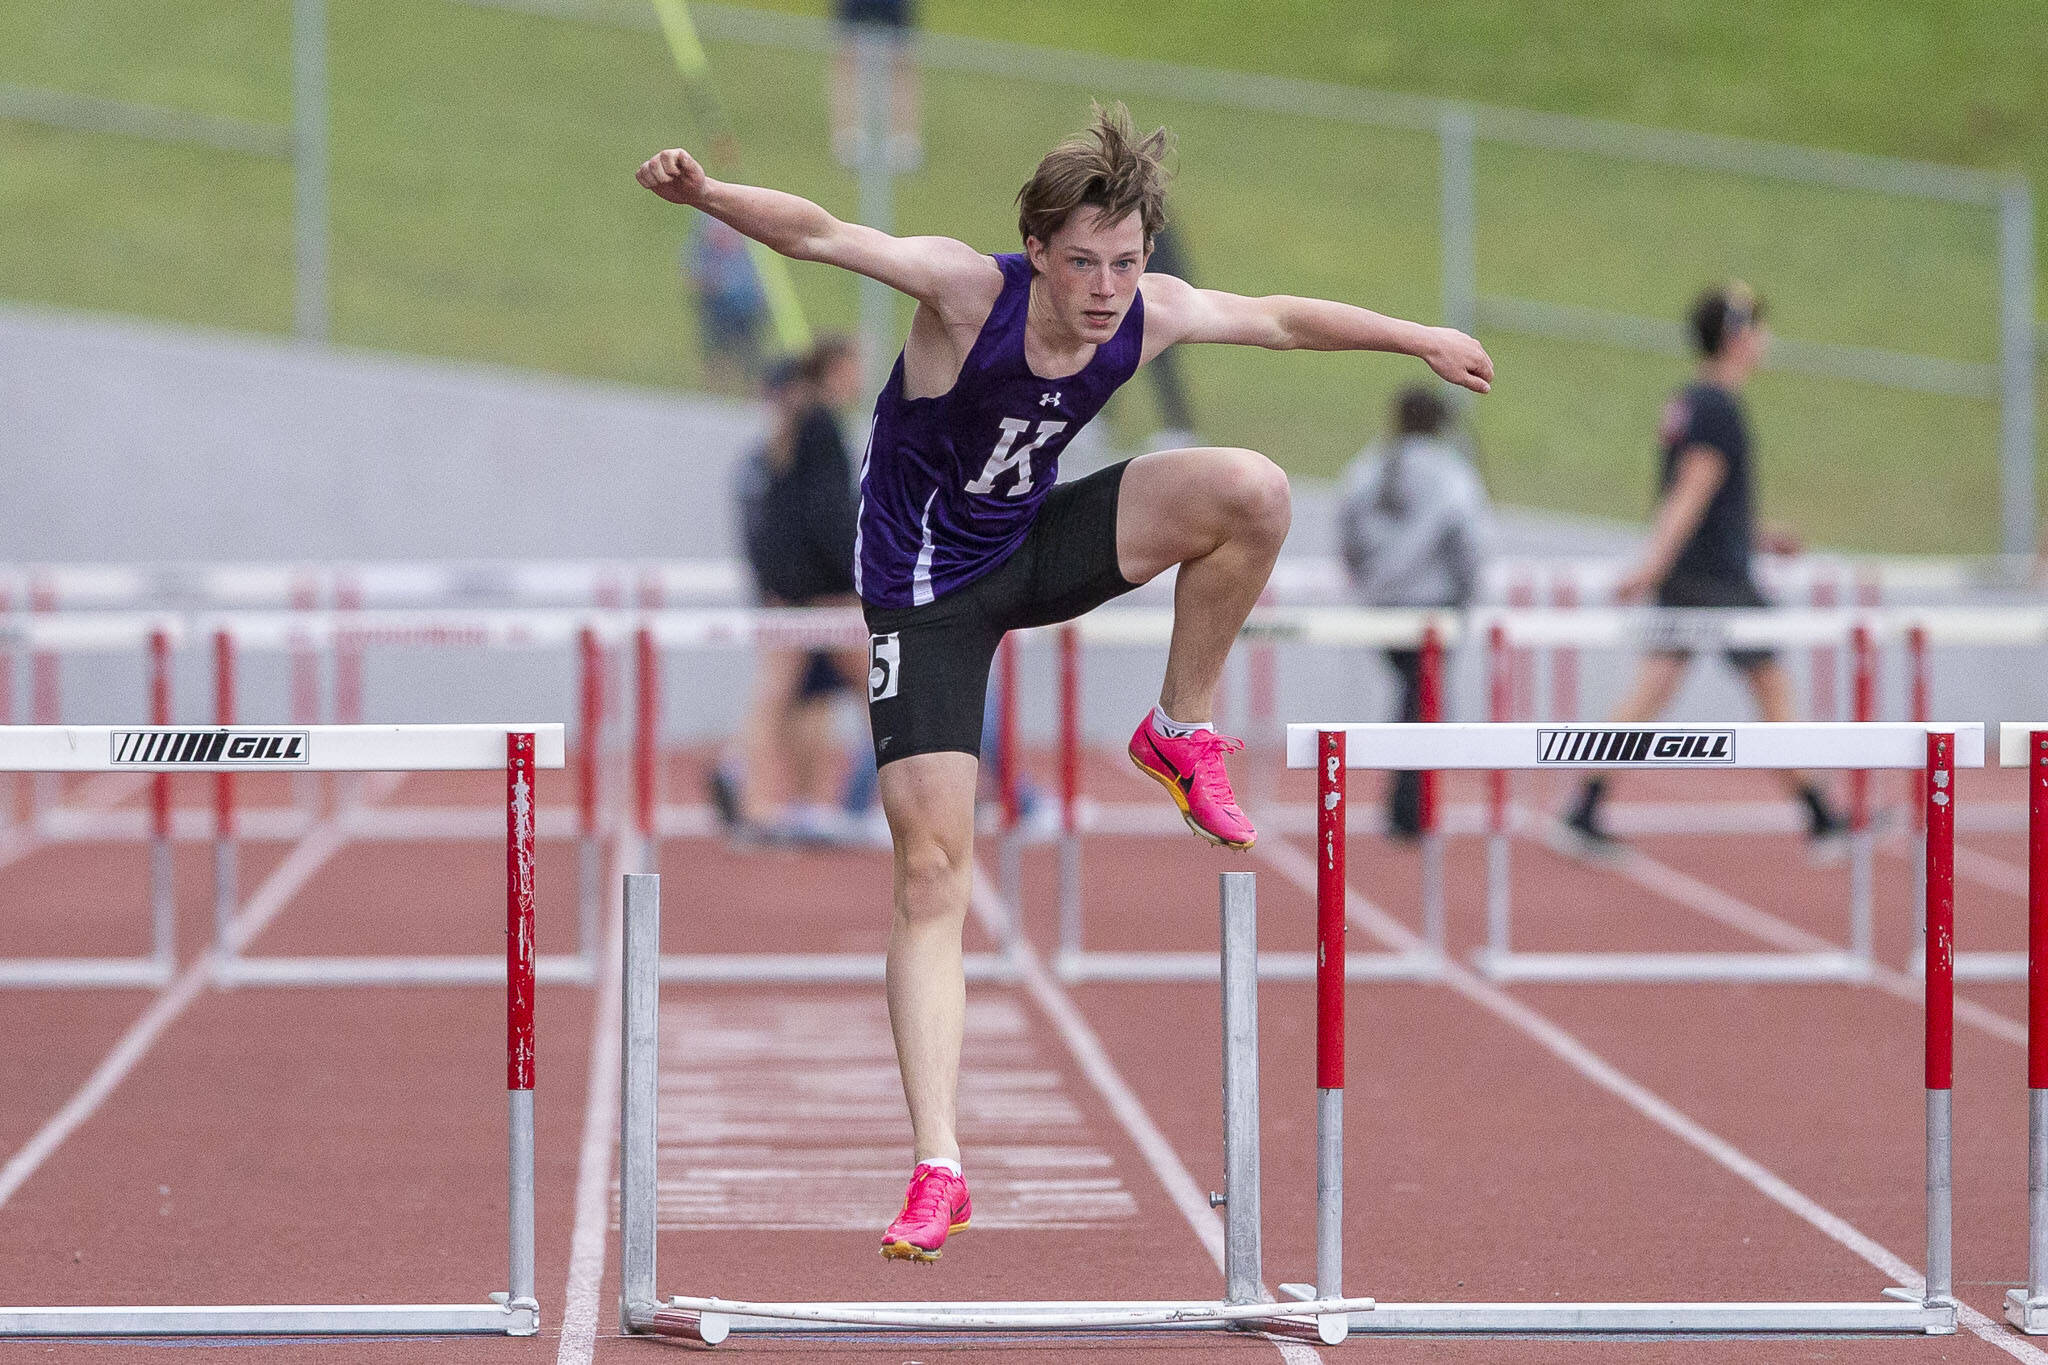 Kamiak’s Miller Warm knocks over the final hurdle before crossing the finish line in the Men’s 300 Meter Hurdles during the Eason Invitational at Snohomish High School on Saturday, April 20, 2024 in Snohomish, Washington. (Olivia Vanni / The Herald)